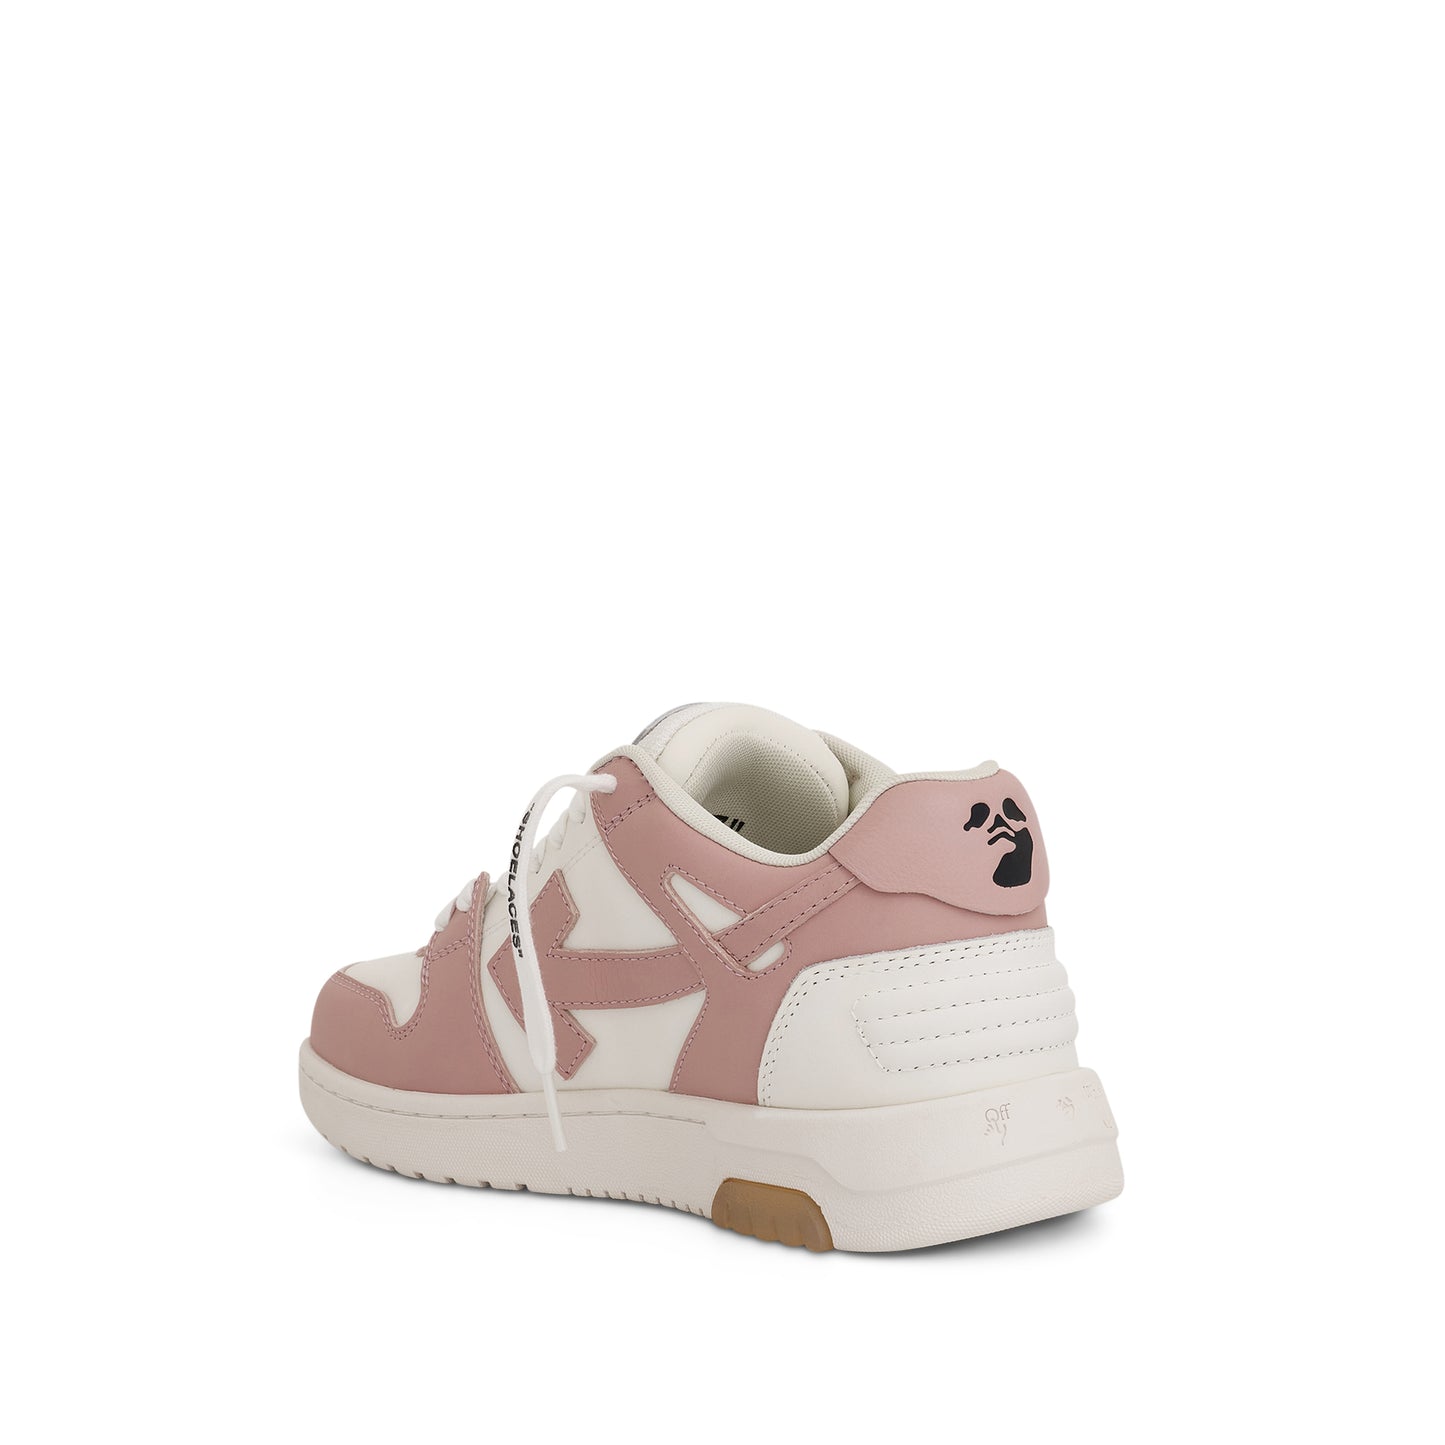 Out Of Office Calf Leather Sneaker in Pink/White